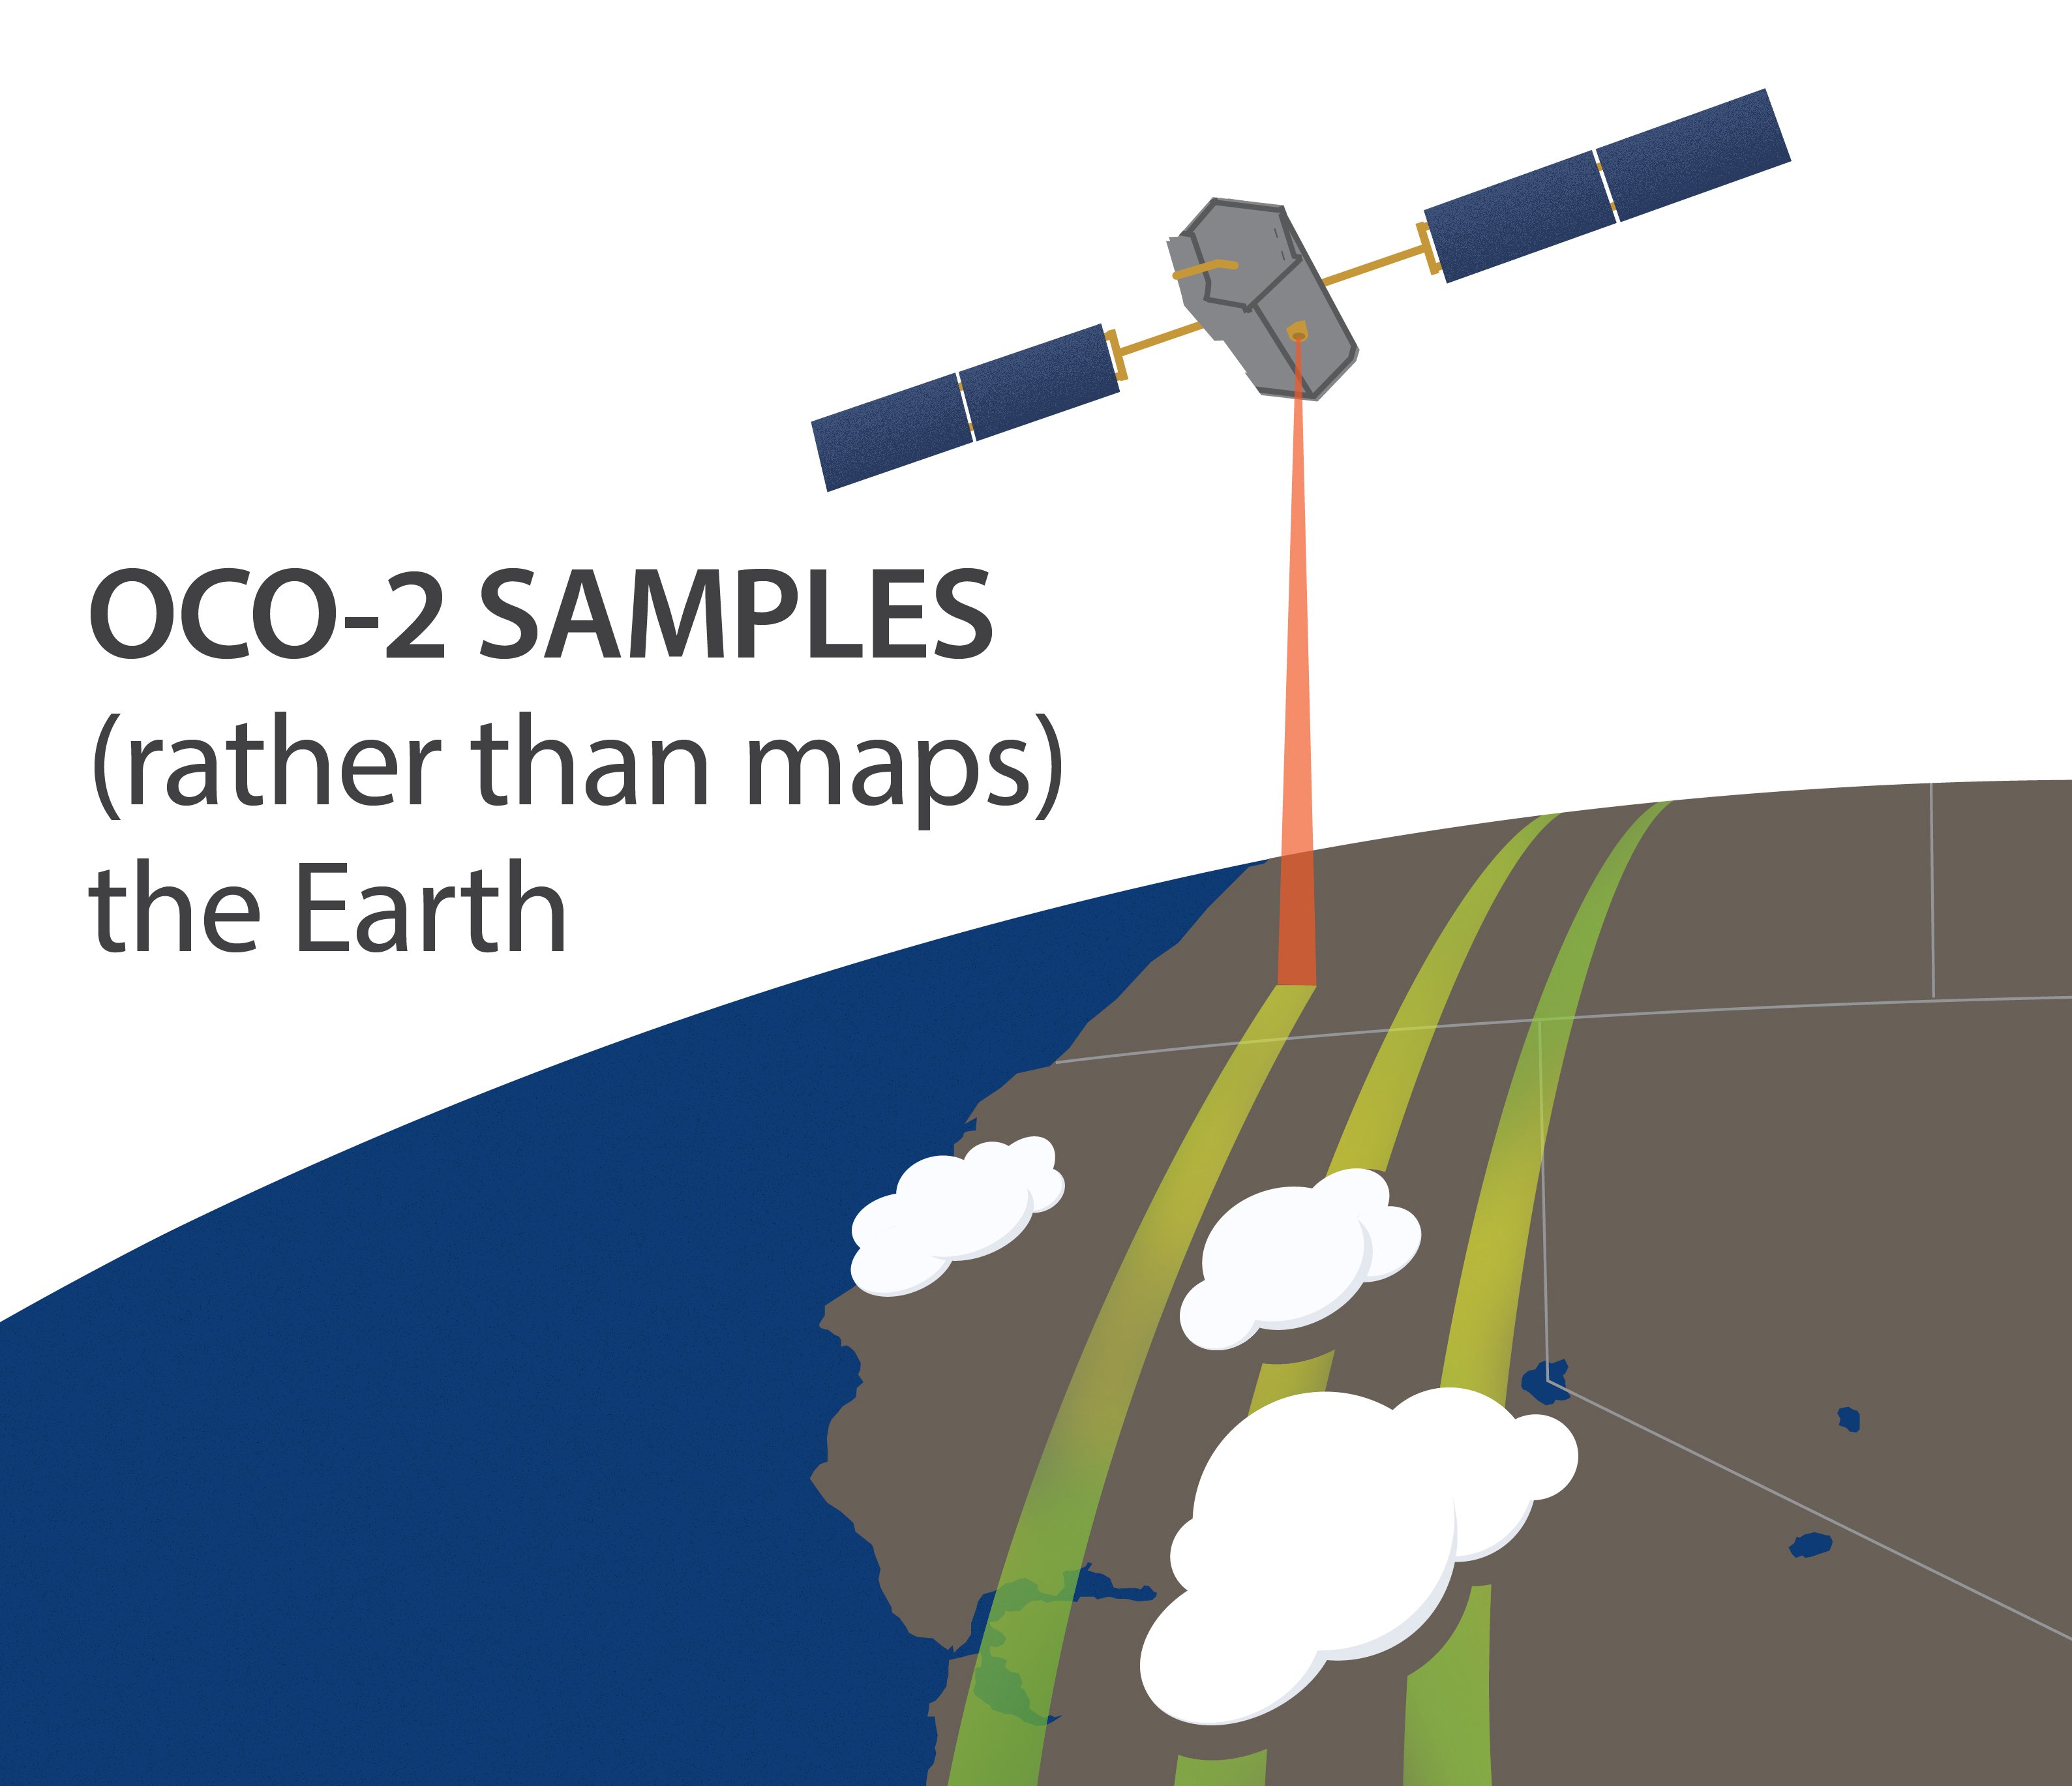 OCO-2 is an experimental mission that samples the Earth, collecting cloud-free, sun-lit measurements of CO2.